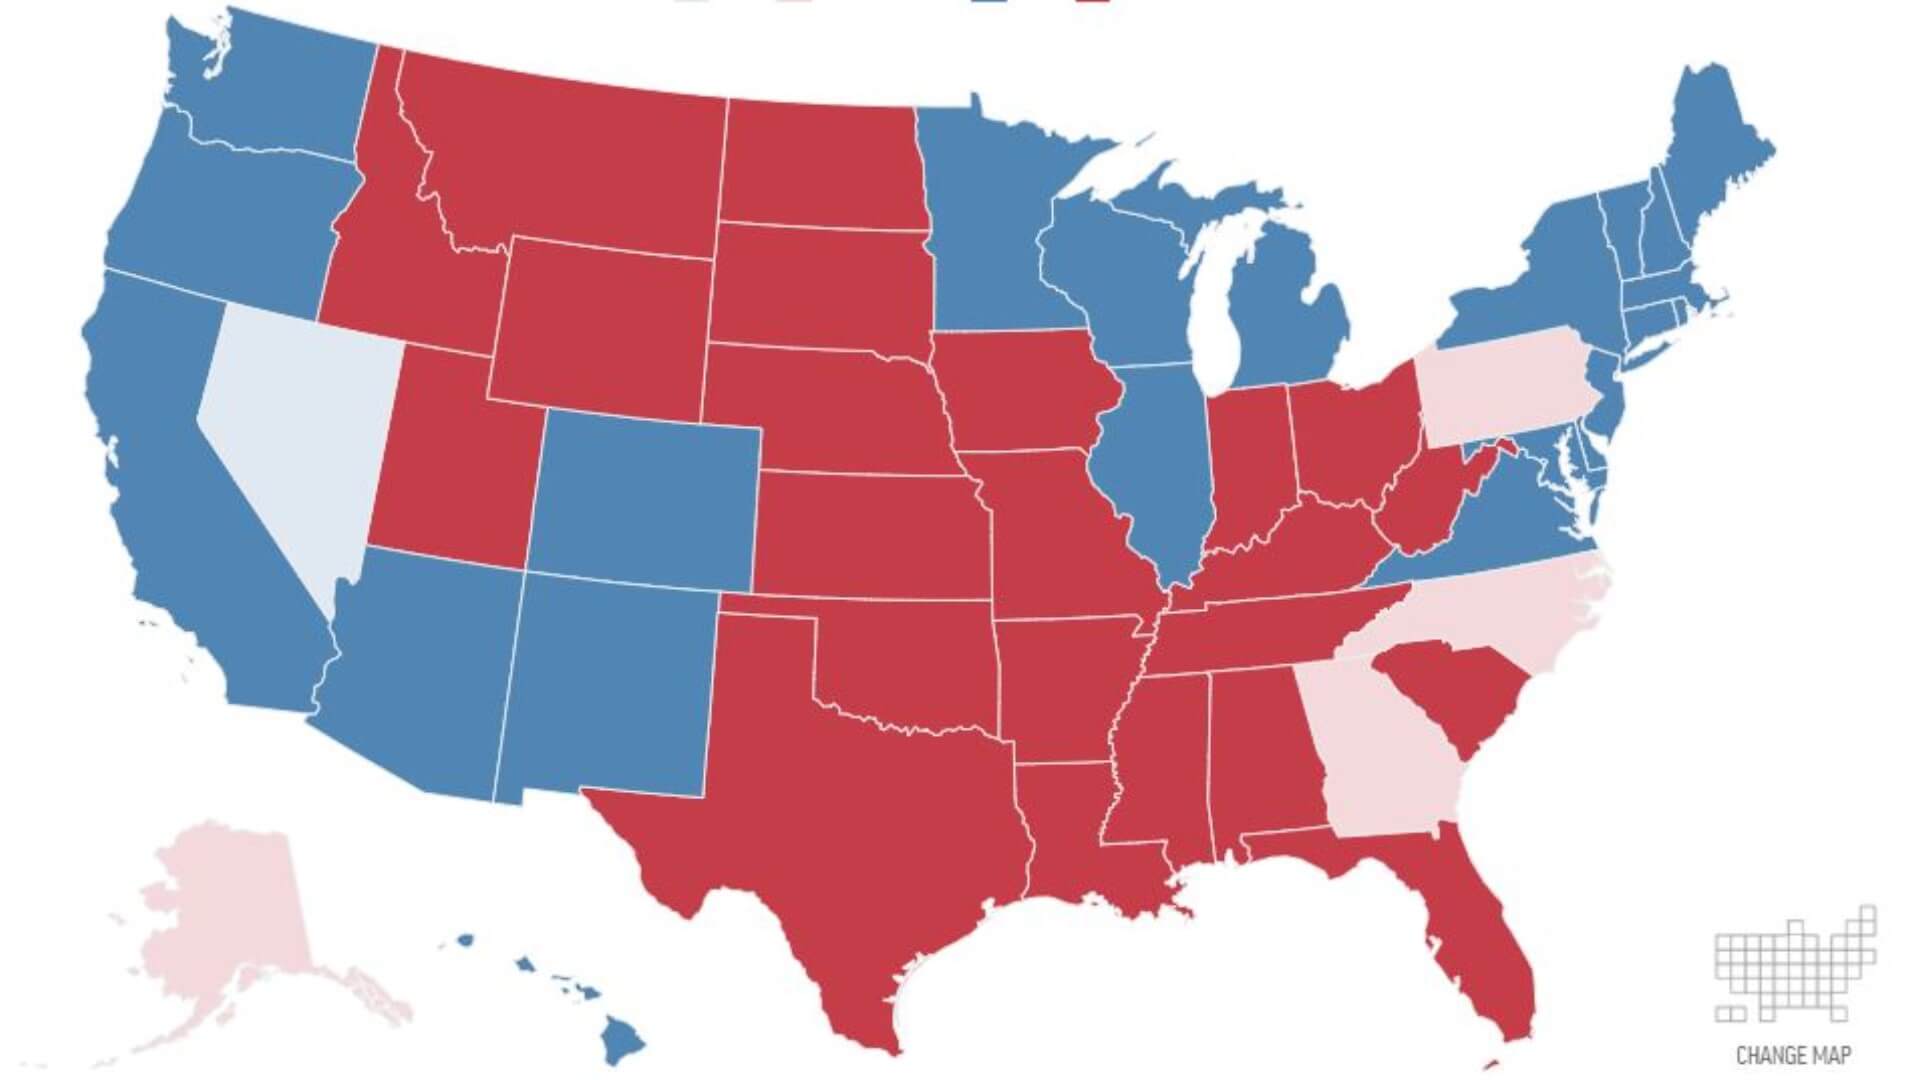 2020 United States Electoral Map